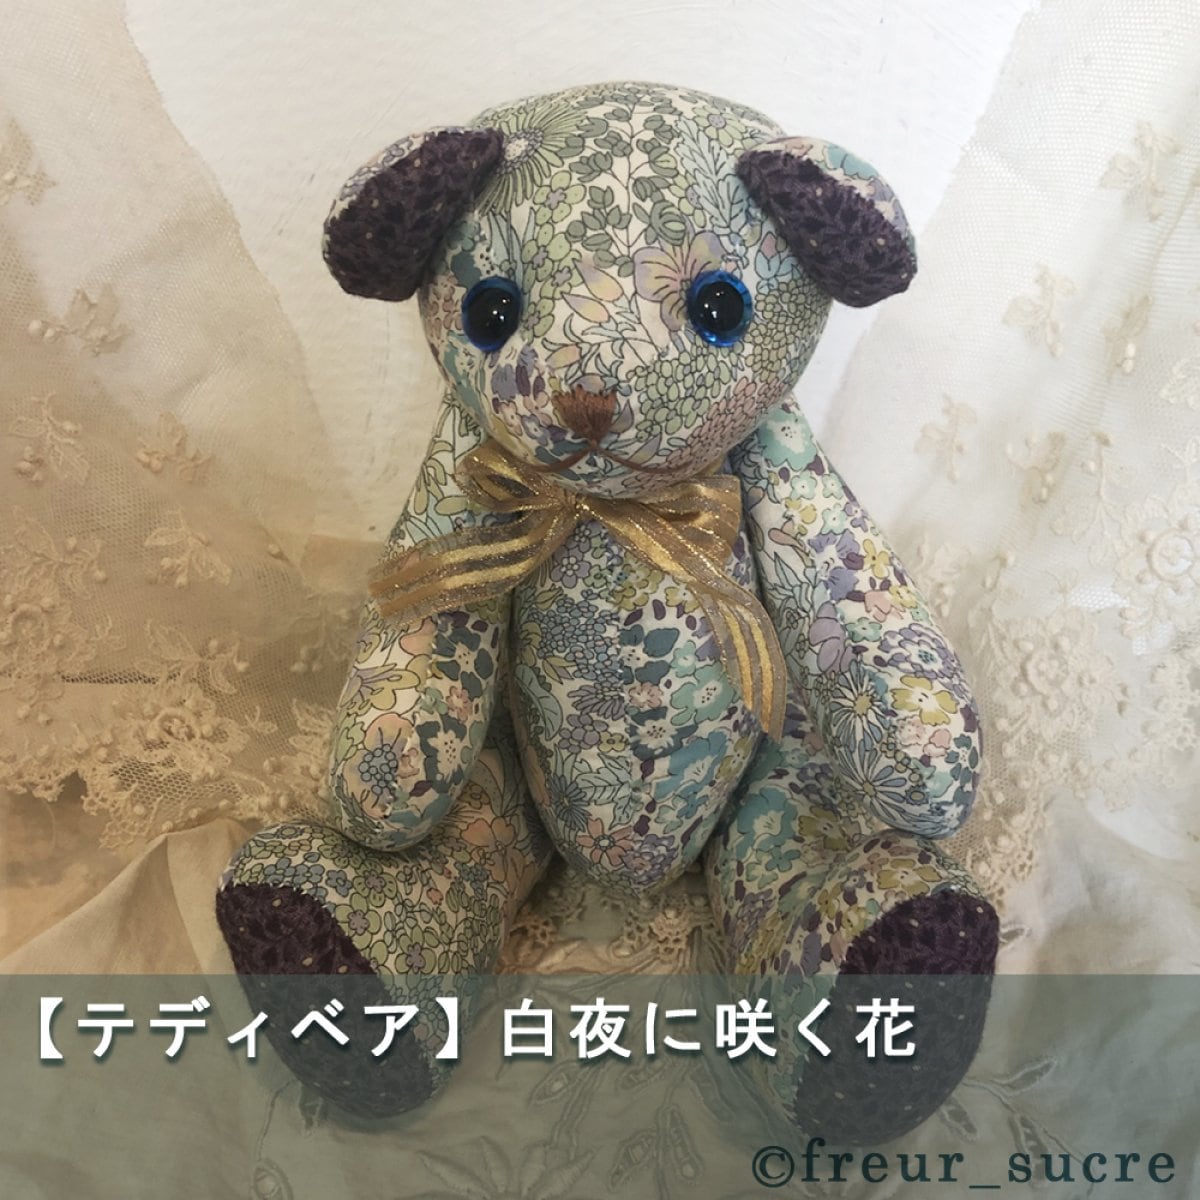 【freur_sucre】手縫いテディベア「白夜に咲く花」